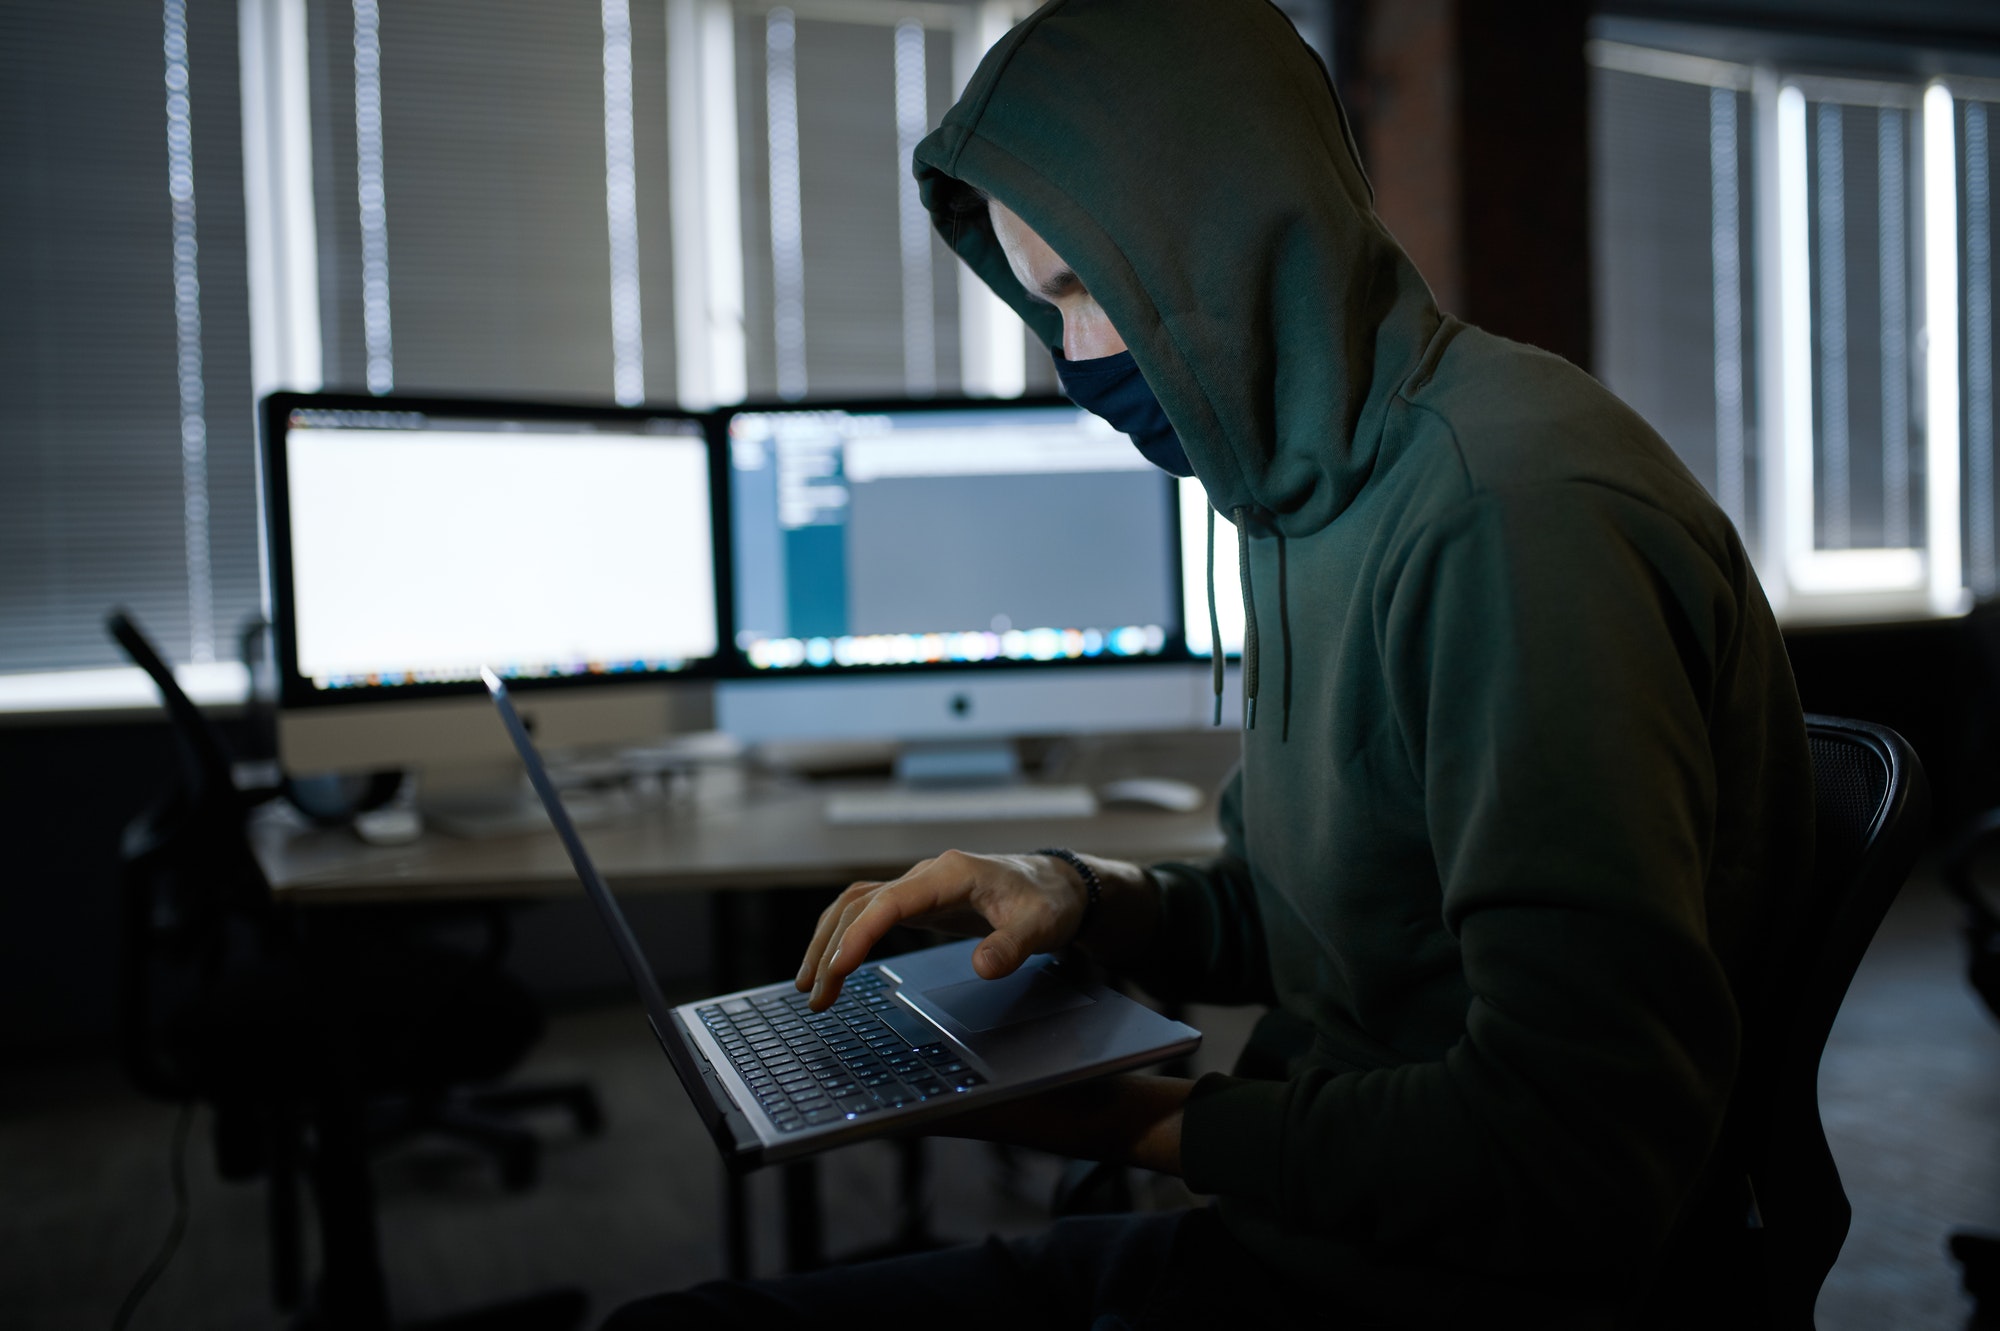 Male hacker in hood holds laptop, front view